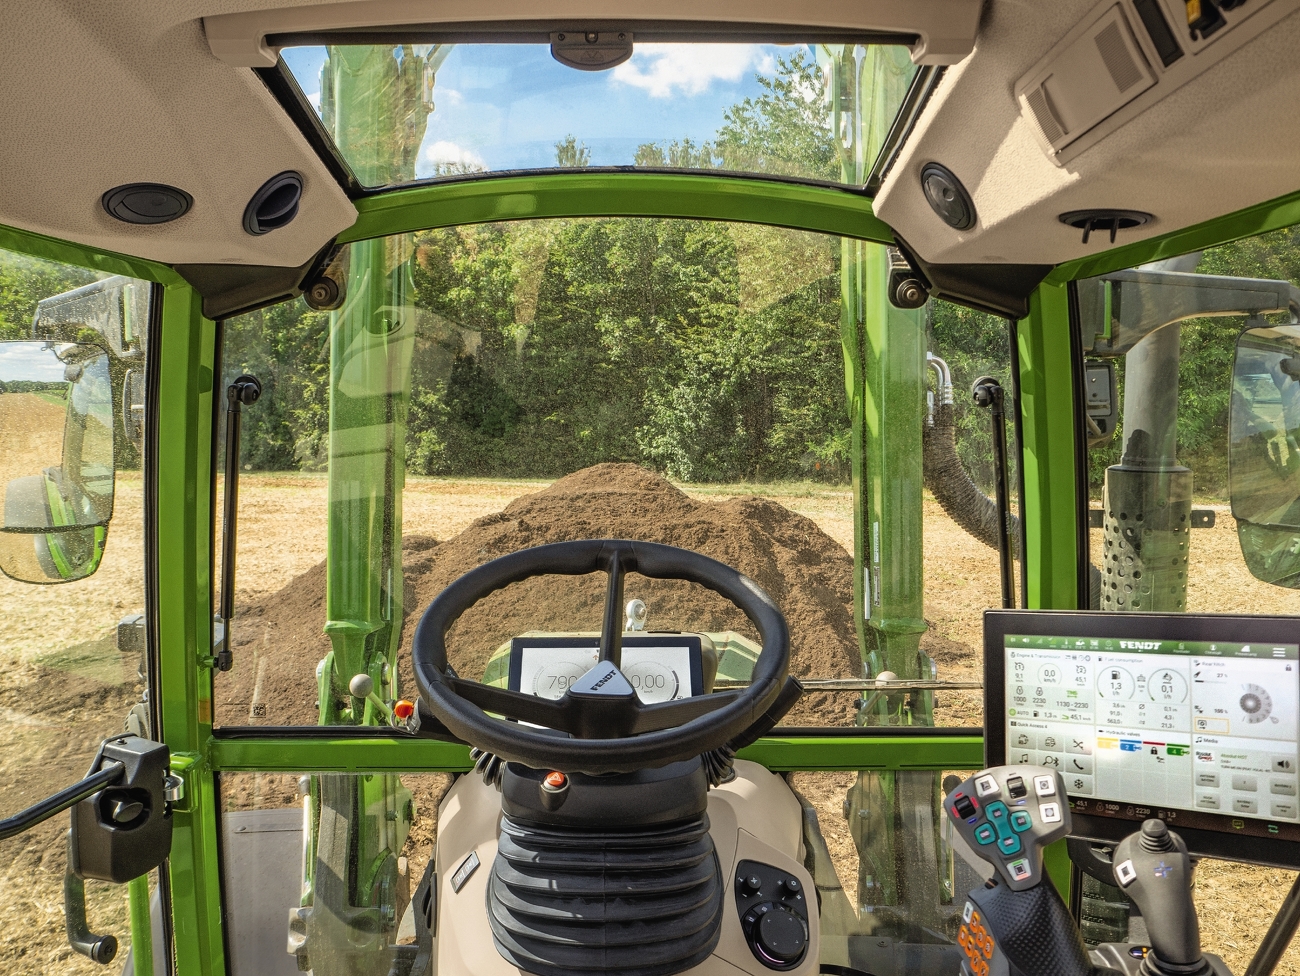 Driver's cab of the Fendt 200 Vario